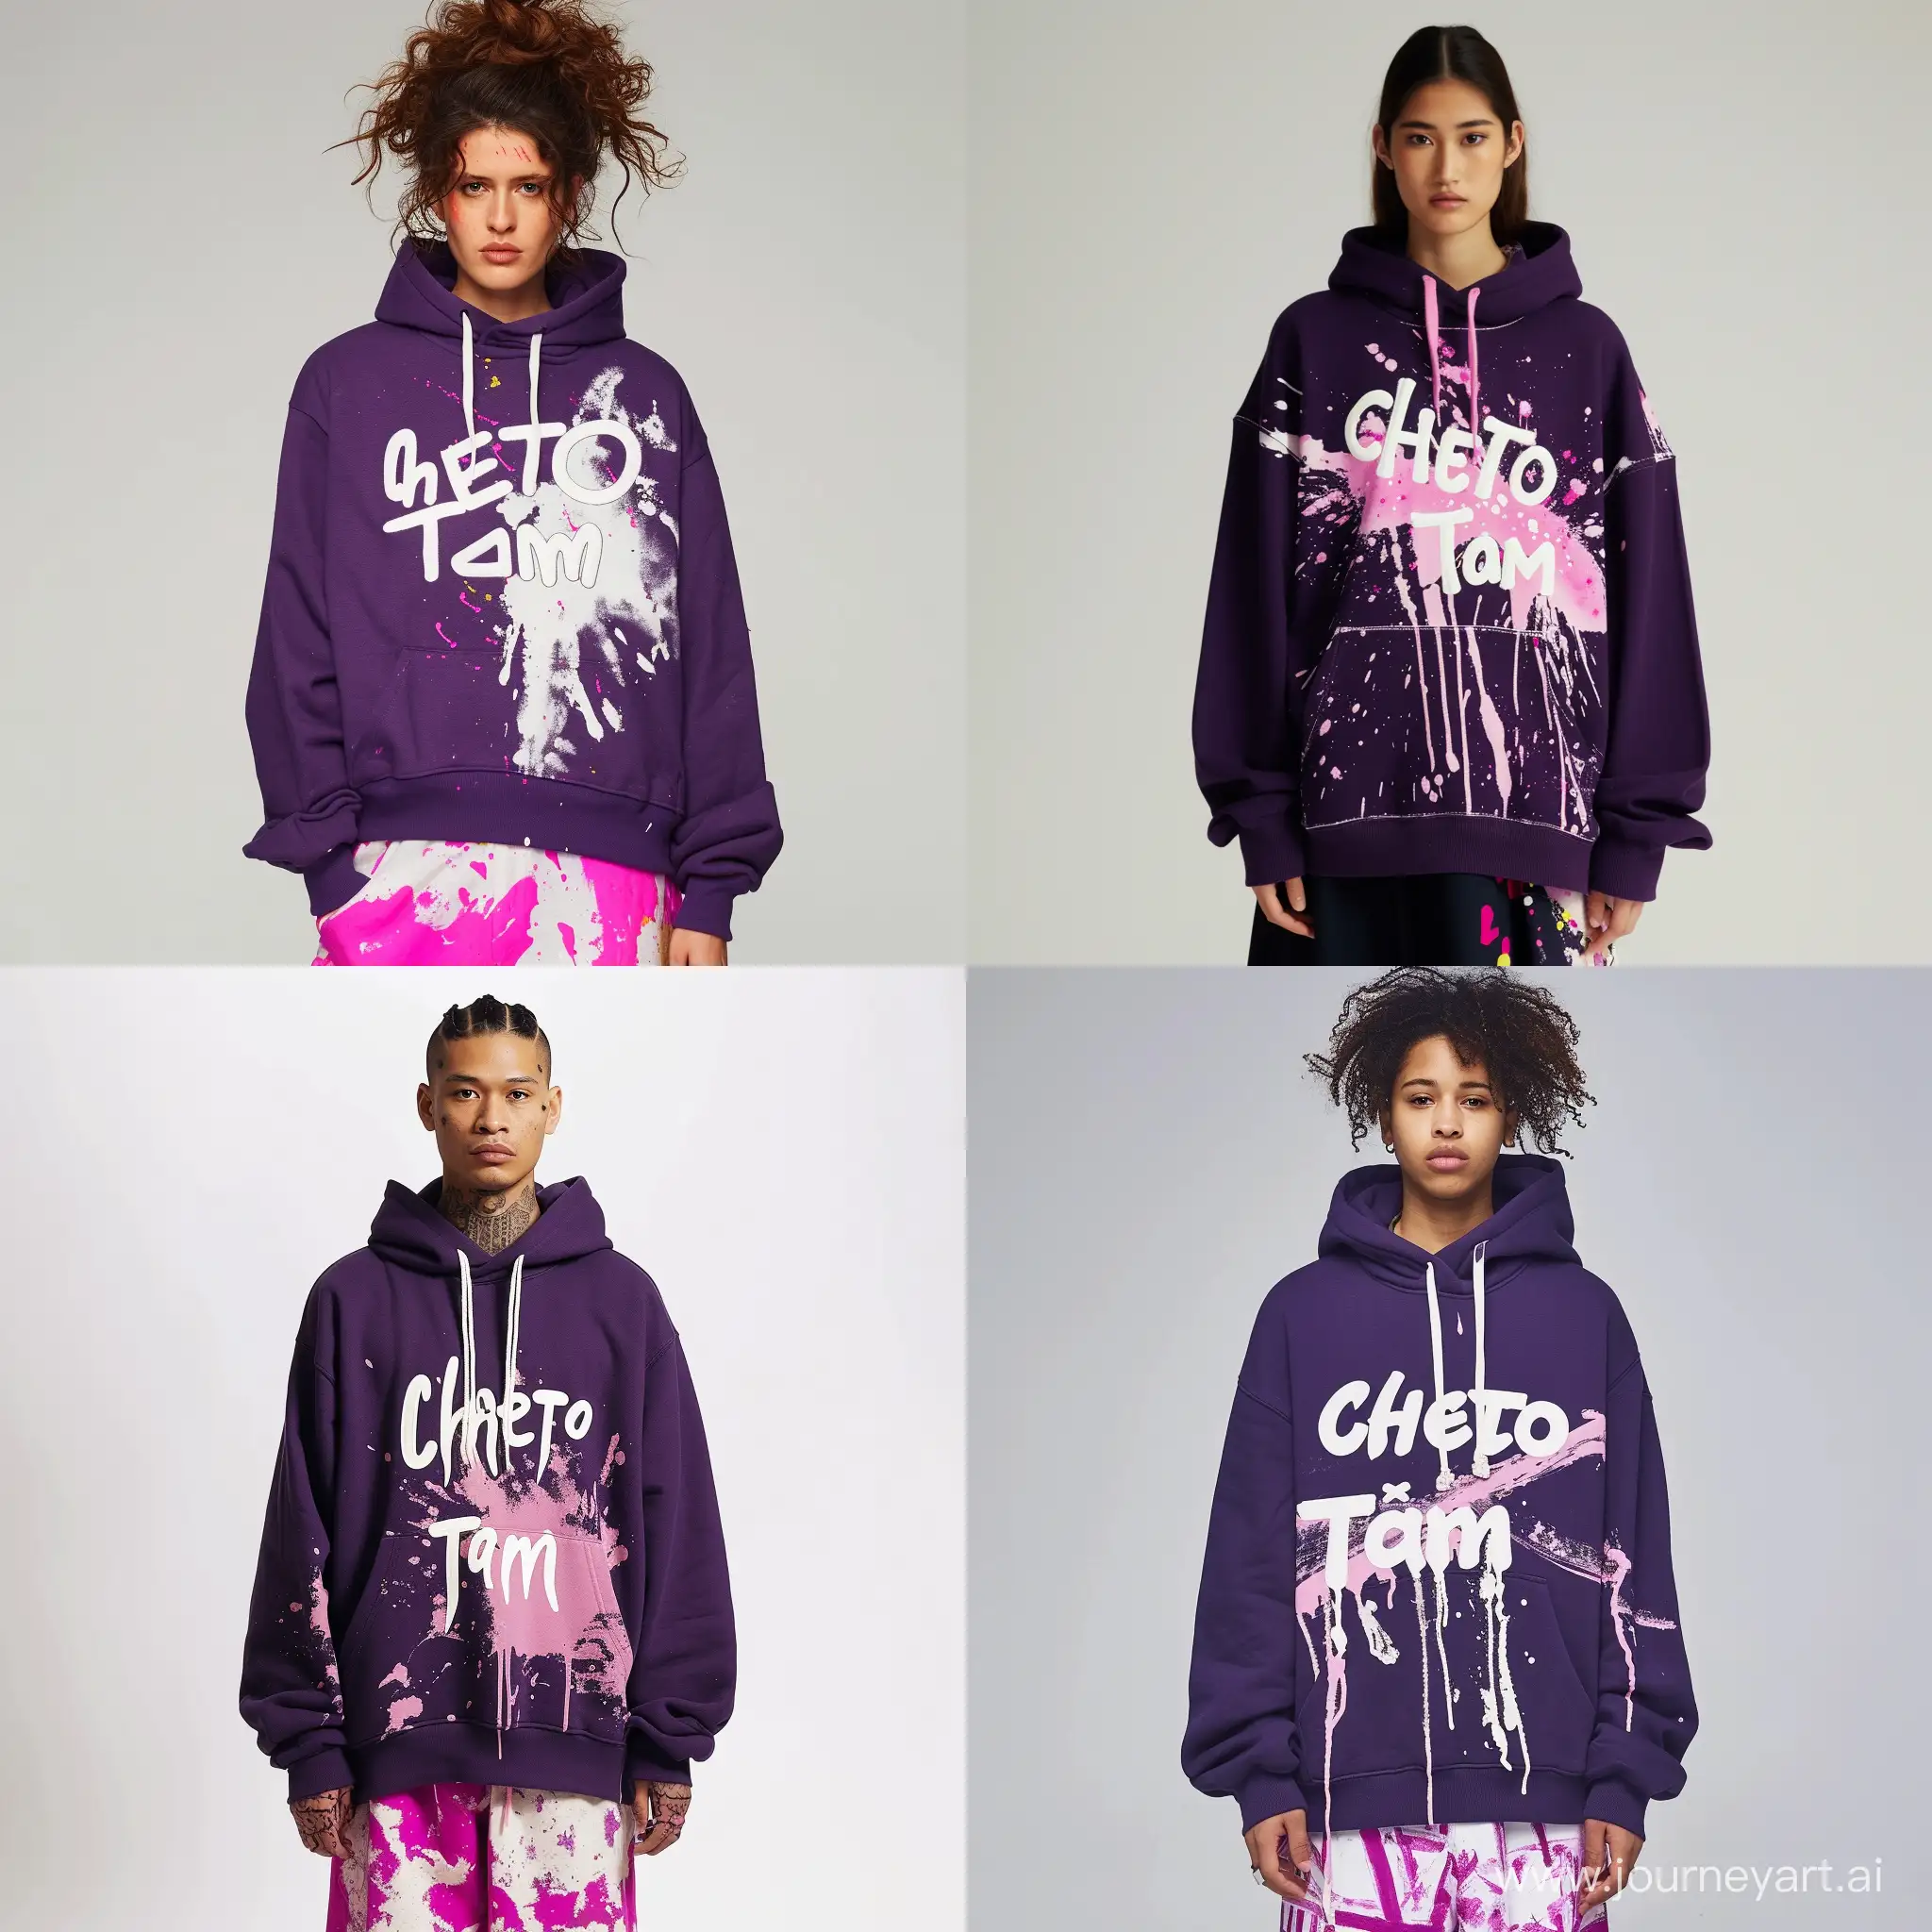 Fashionable-Purple-Hoodie-with-White-and-Pink-Paint-and-Cheto-Tam-Embroidered-Lettering-on-Model